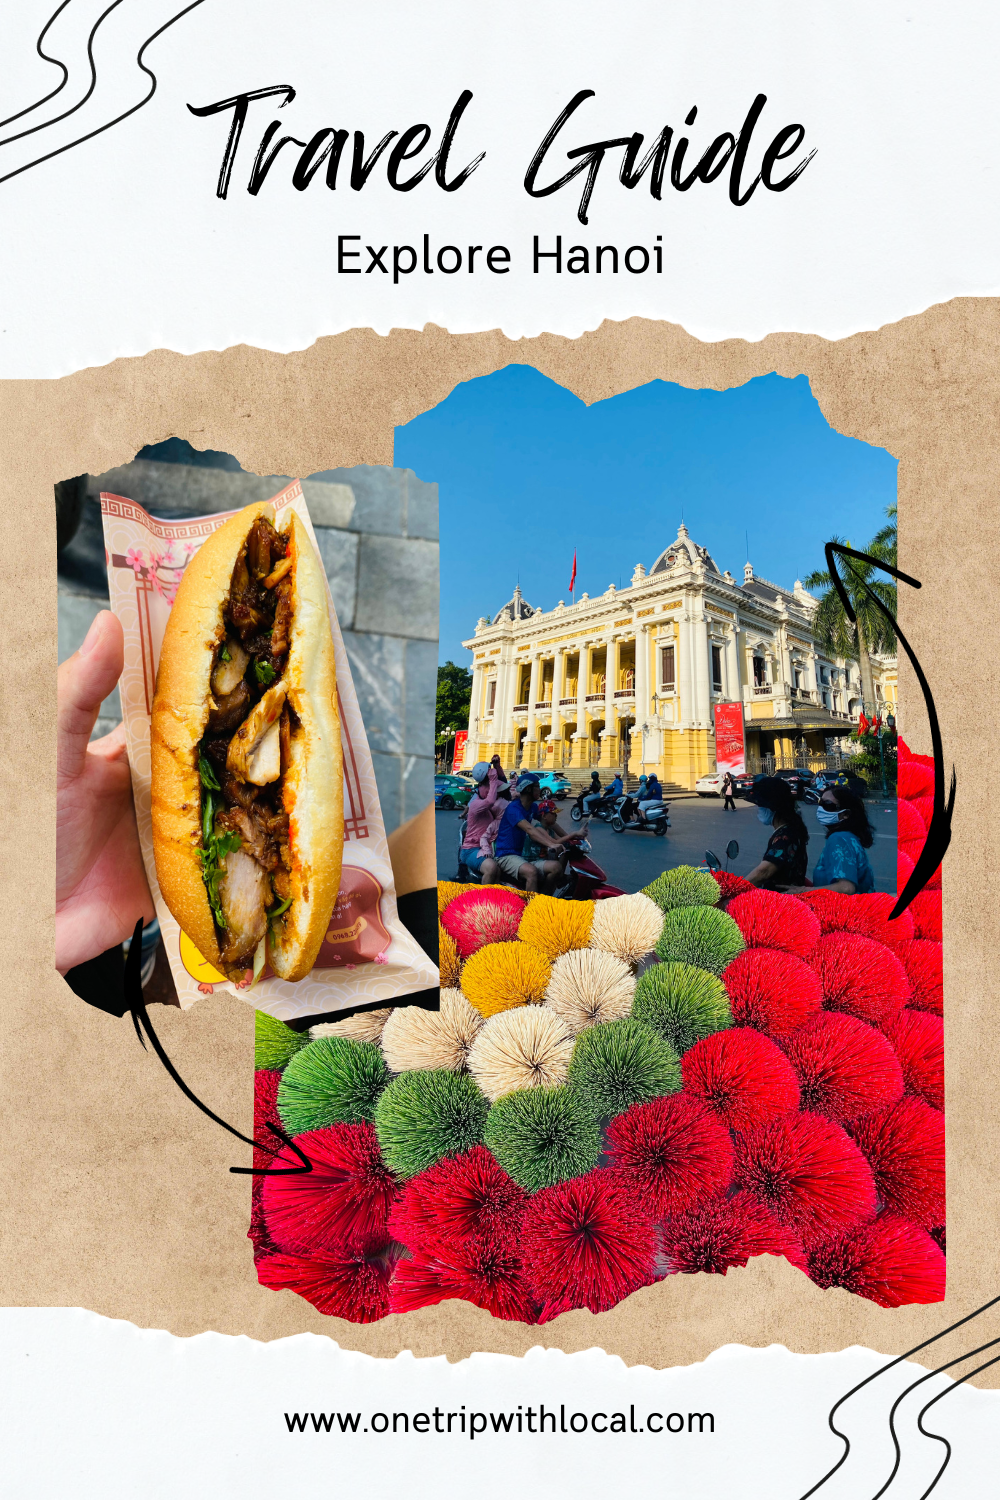 Travel guide hanoi Our October starts with great news!